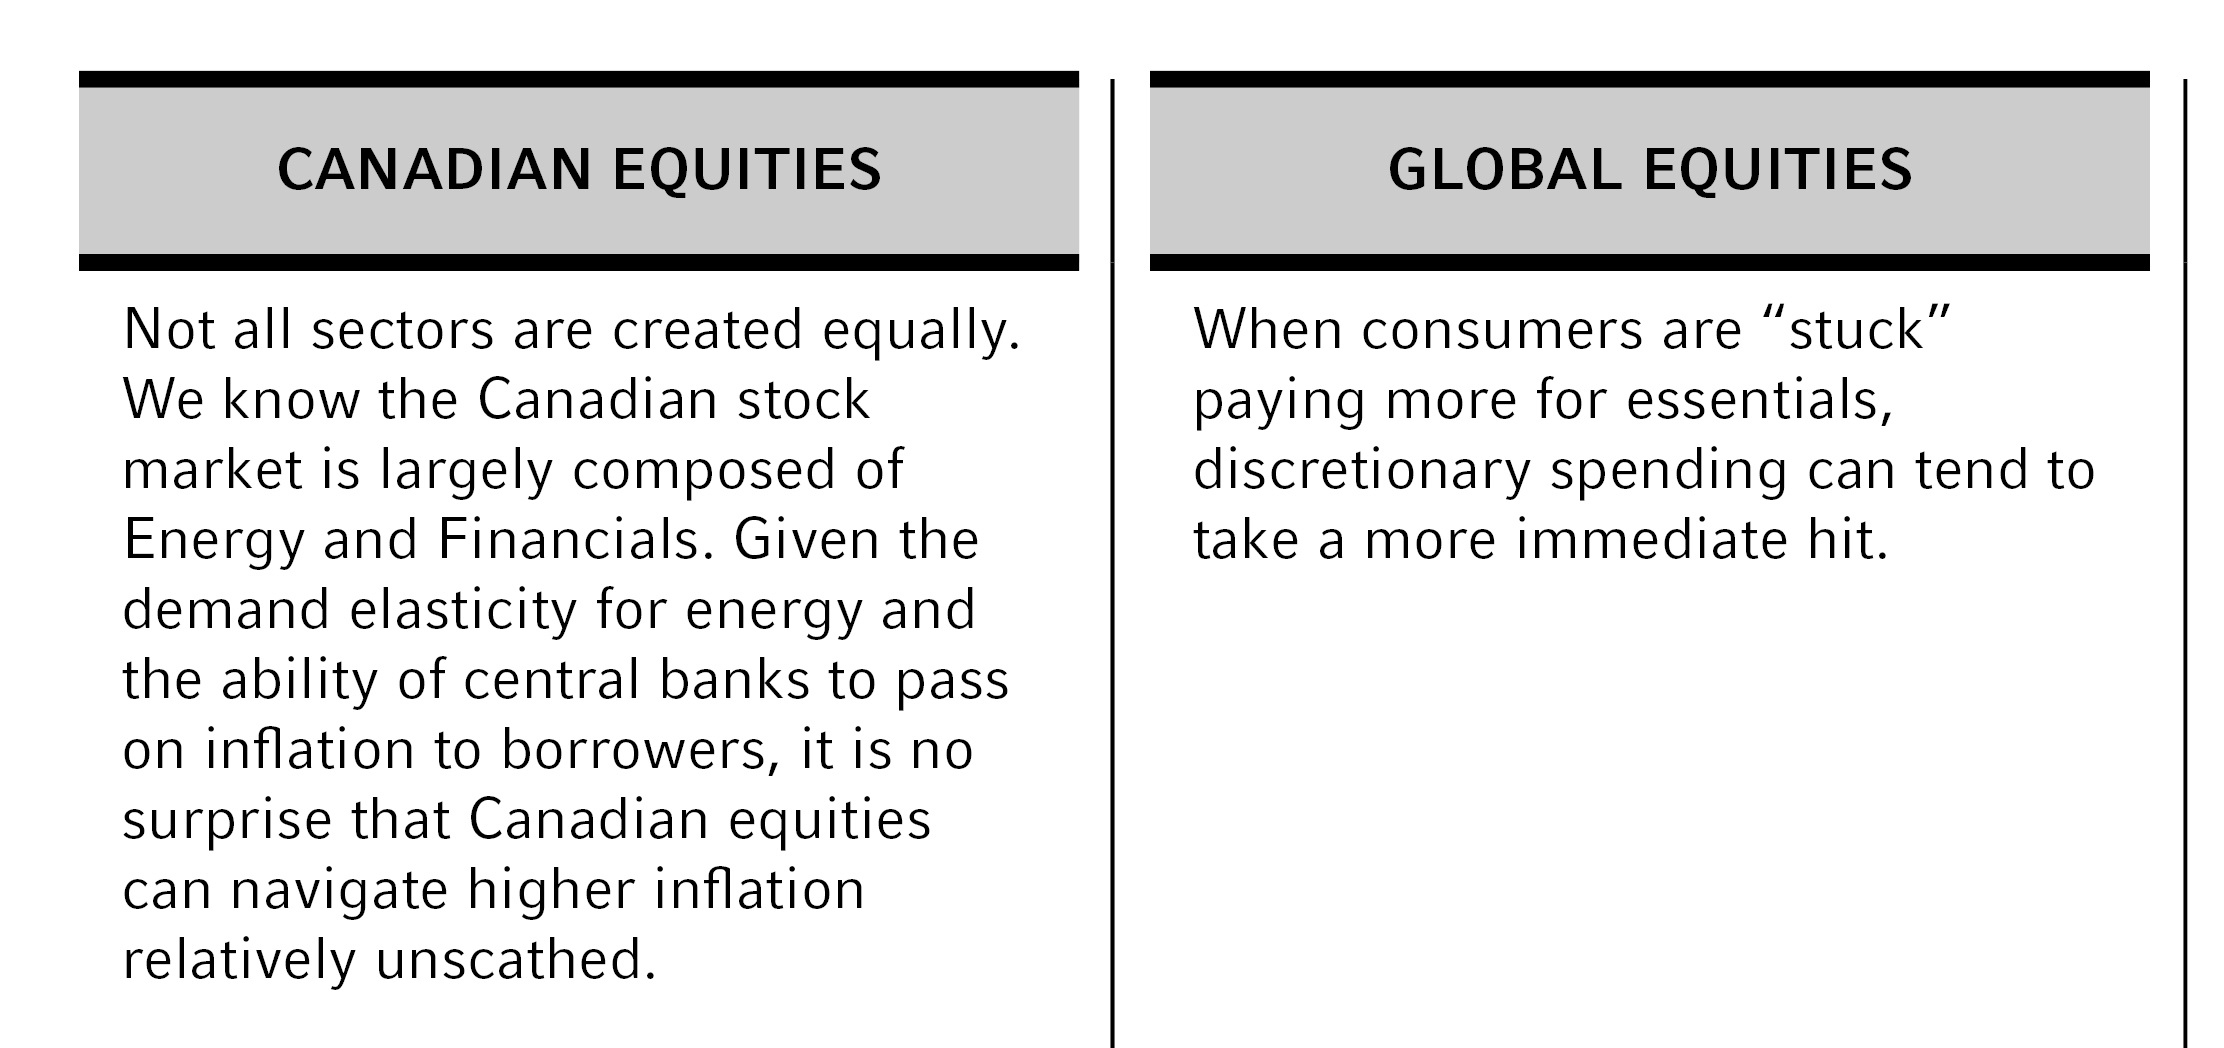 Traditional equities